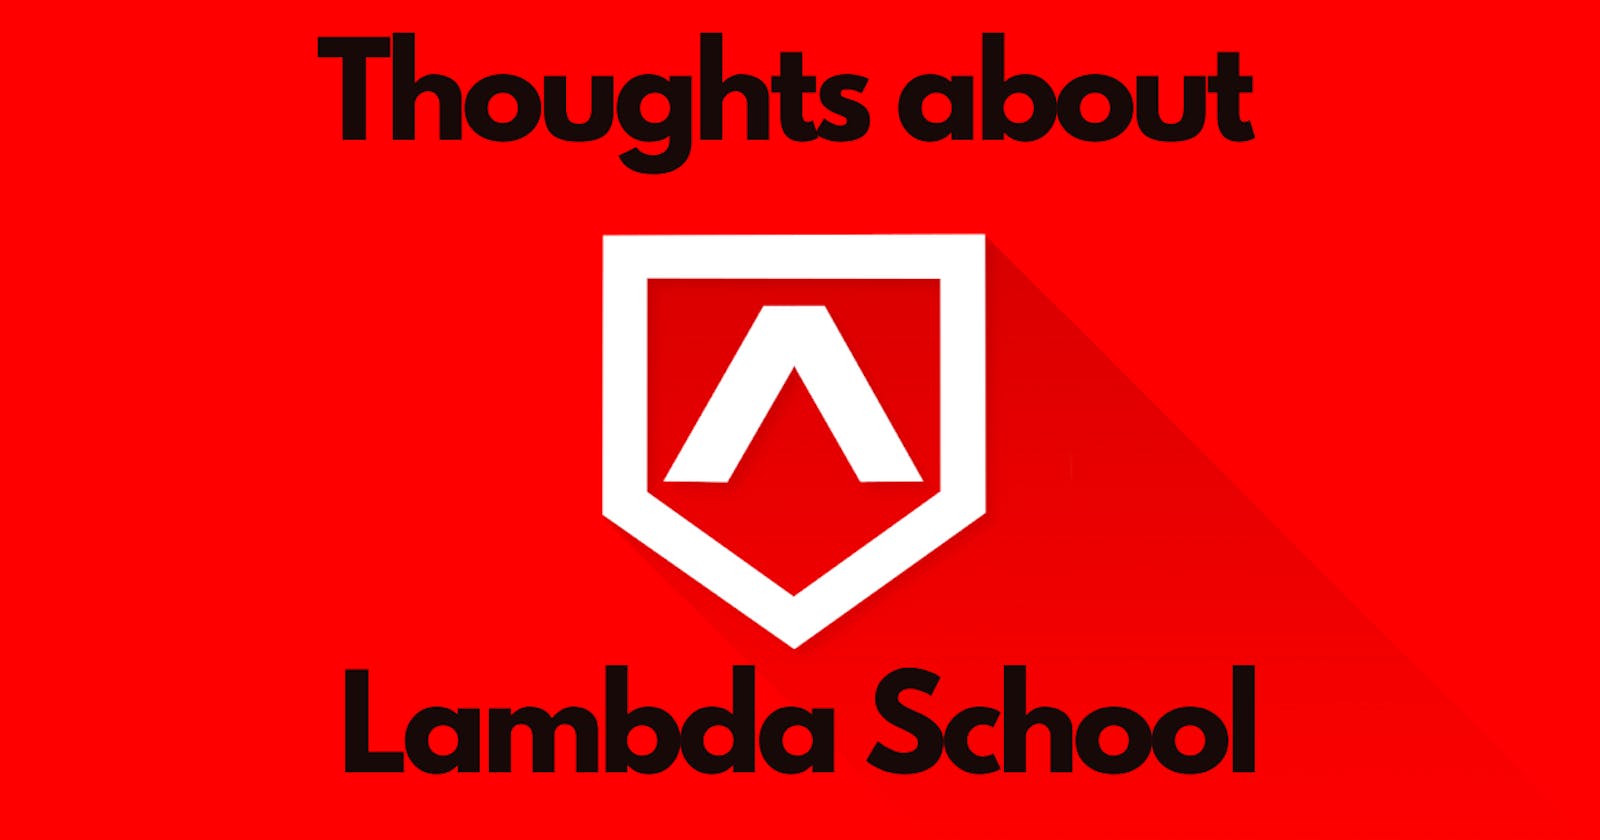 Lambda School: Thoughts from a Part-Time Student